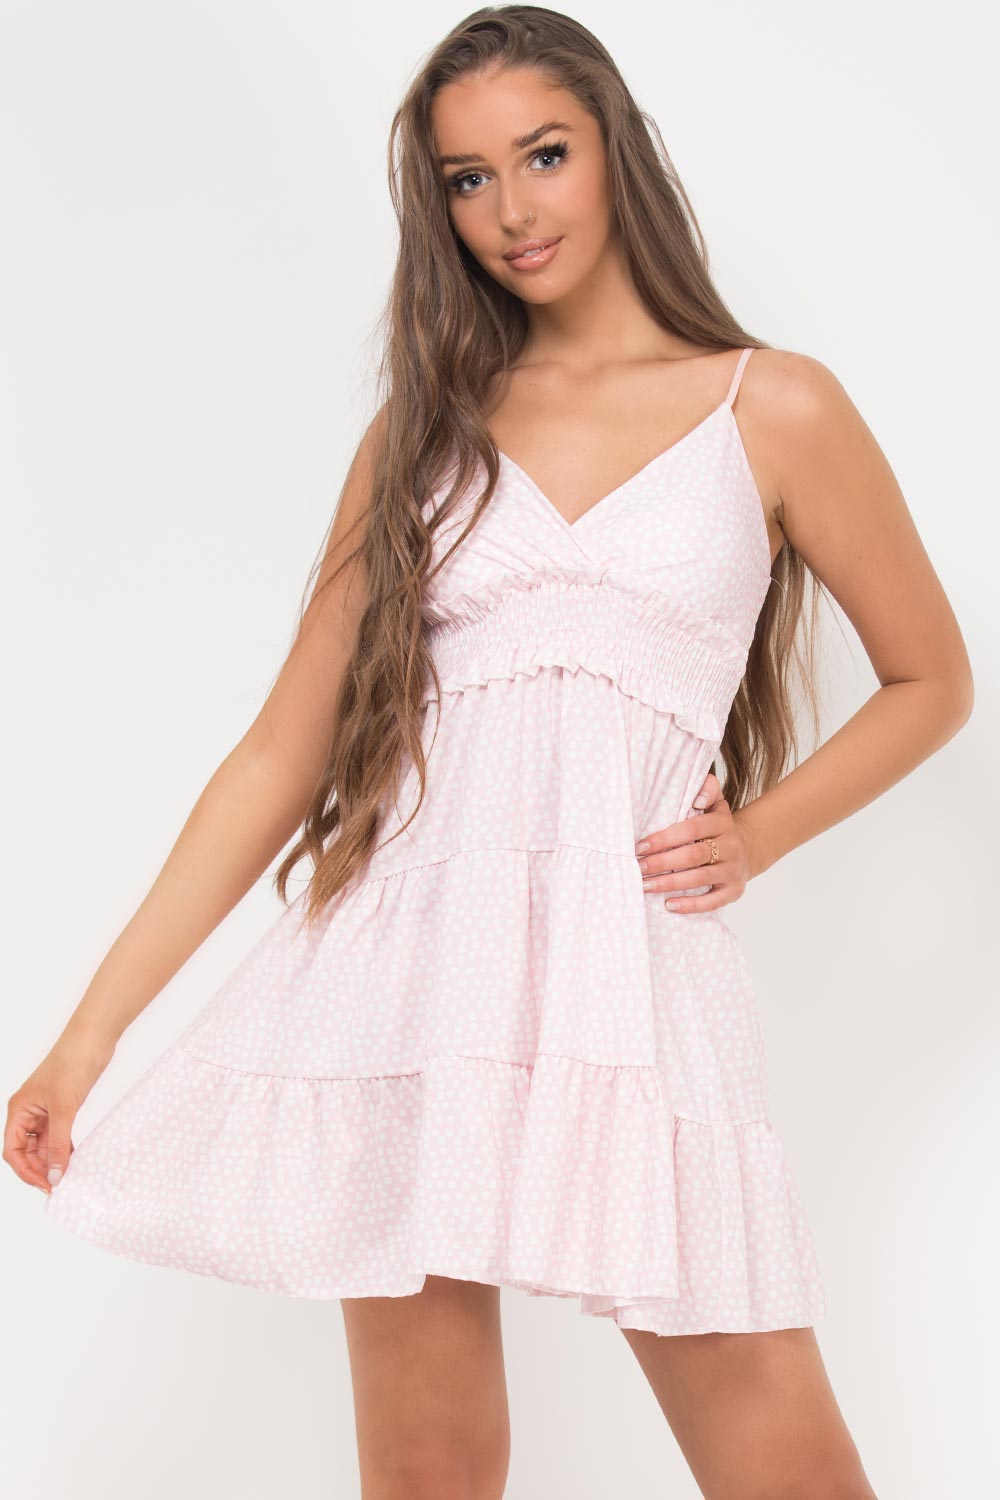 tiered strappy skater dress pink polka dots